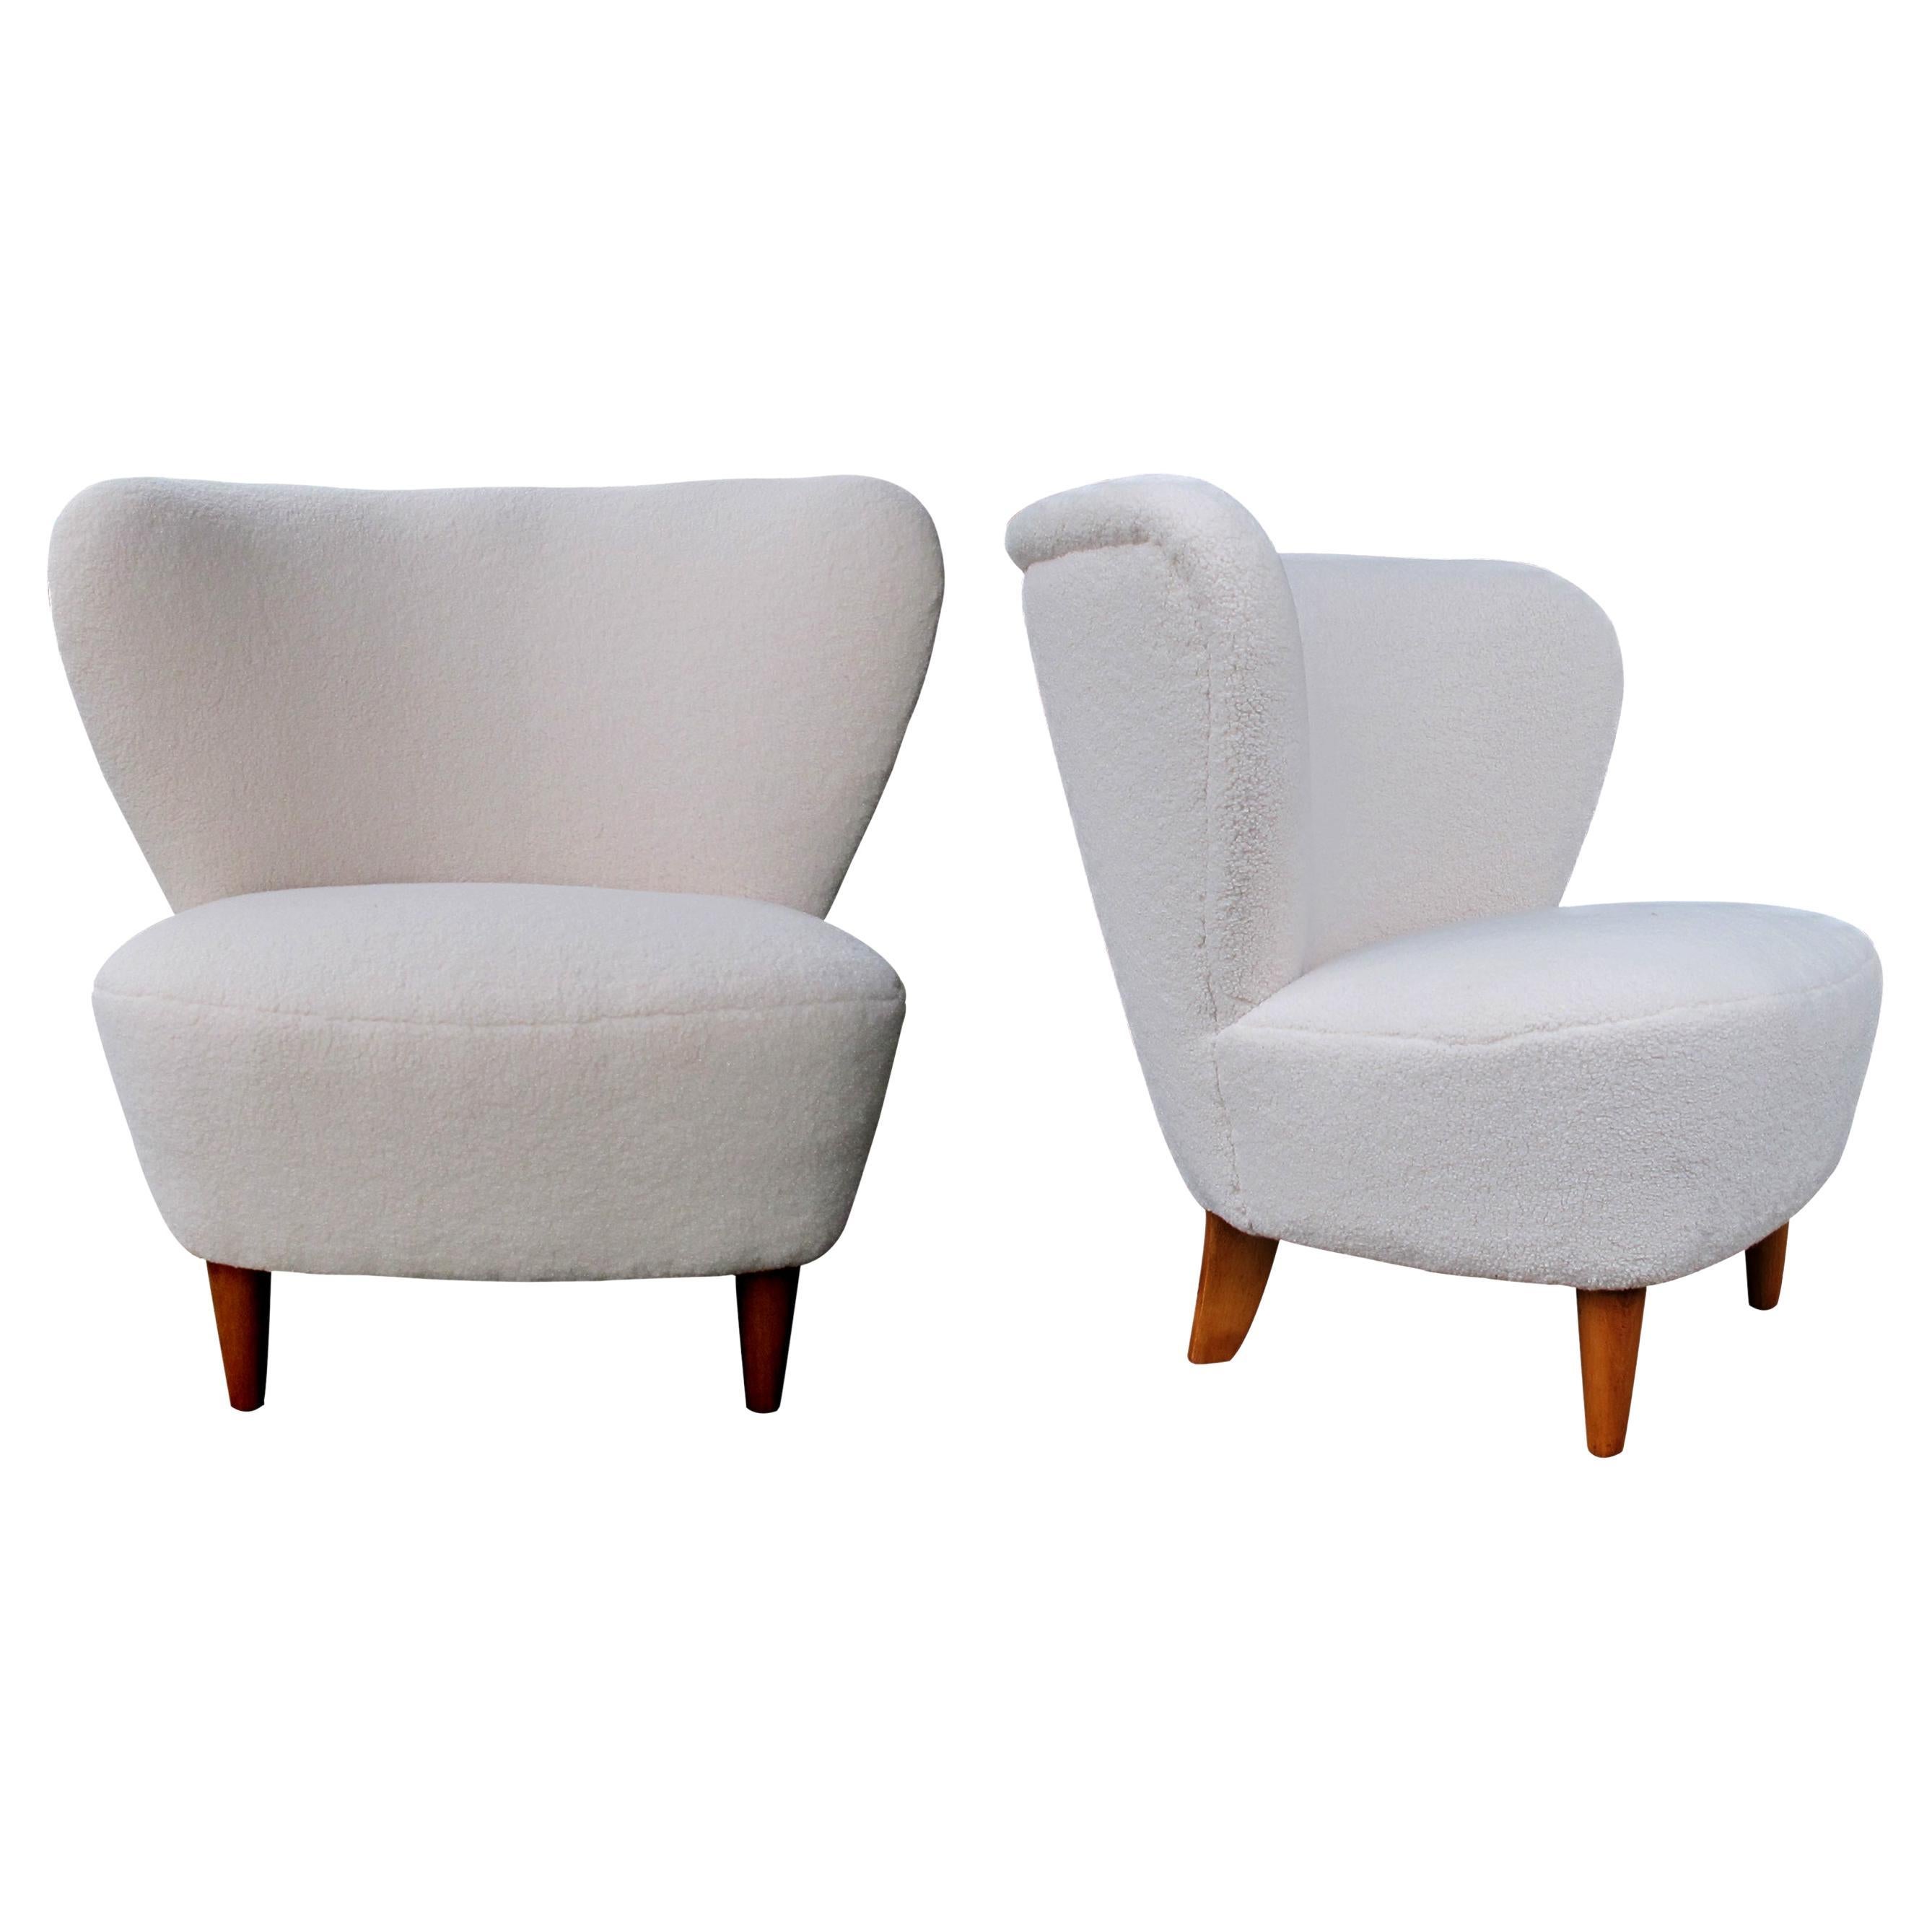 1940s Pair of Cocktail Armchairs by Gösta Jonsson Newly Upholstered, Swedish